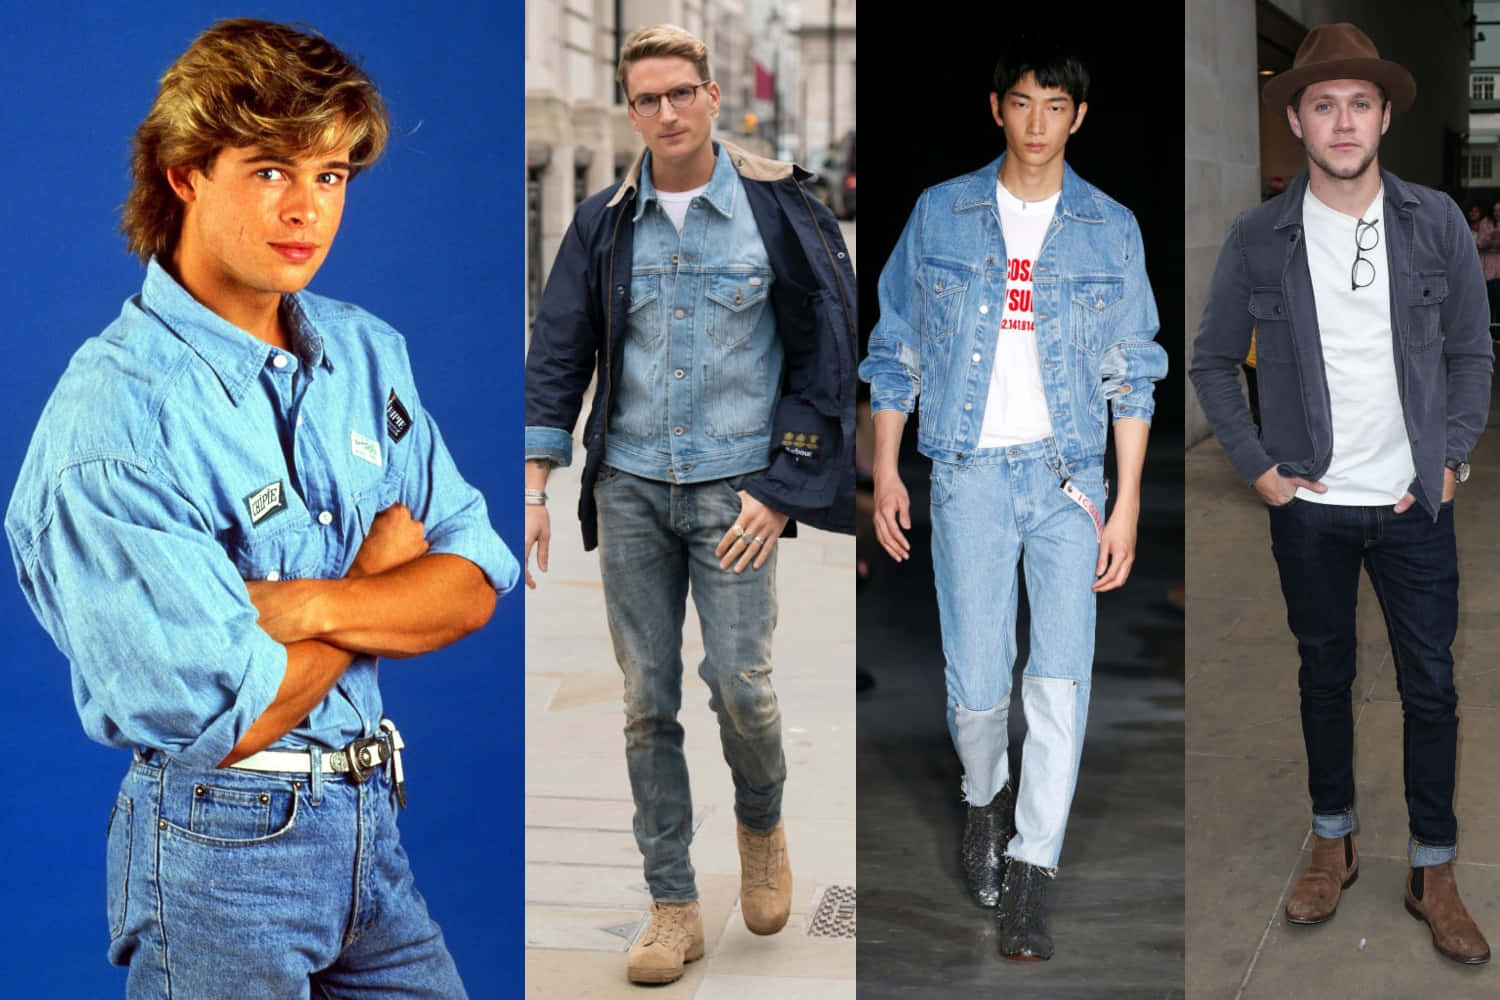 Relive the glory days of 80s fashion with this iconic look!